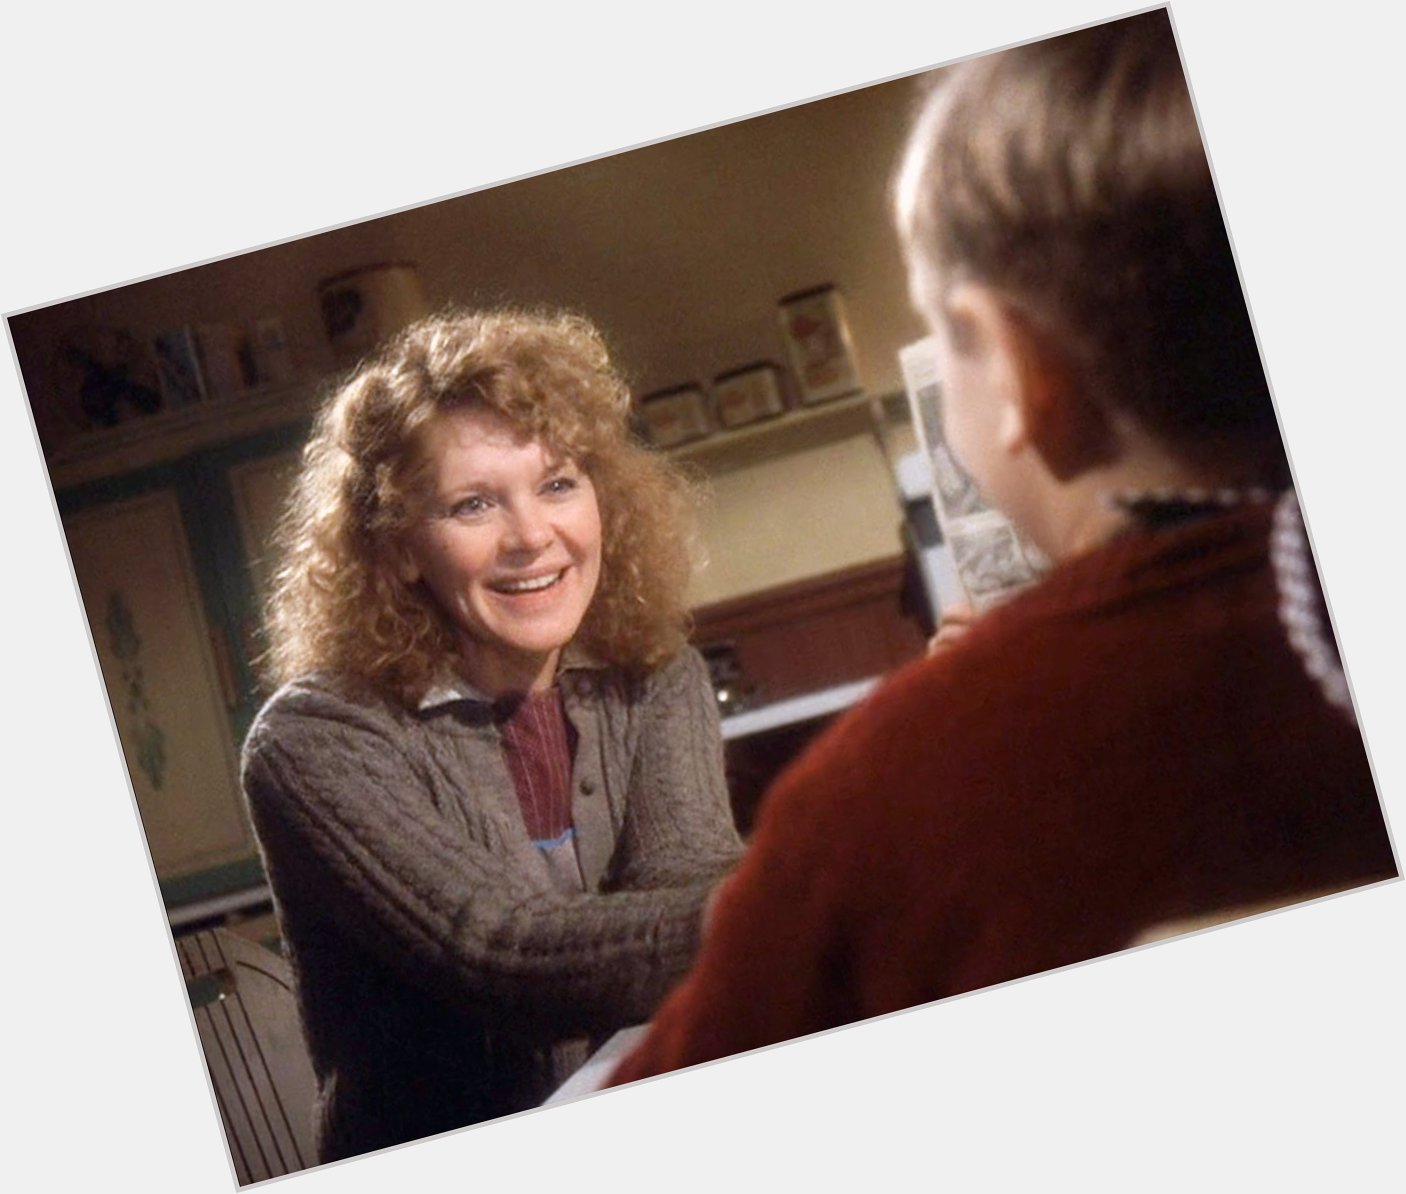 Happy birthday to a warm and wonderful actress, two-time Oscar nominee Melinda Dillon! 